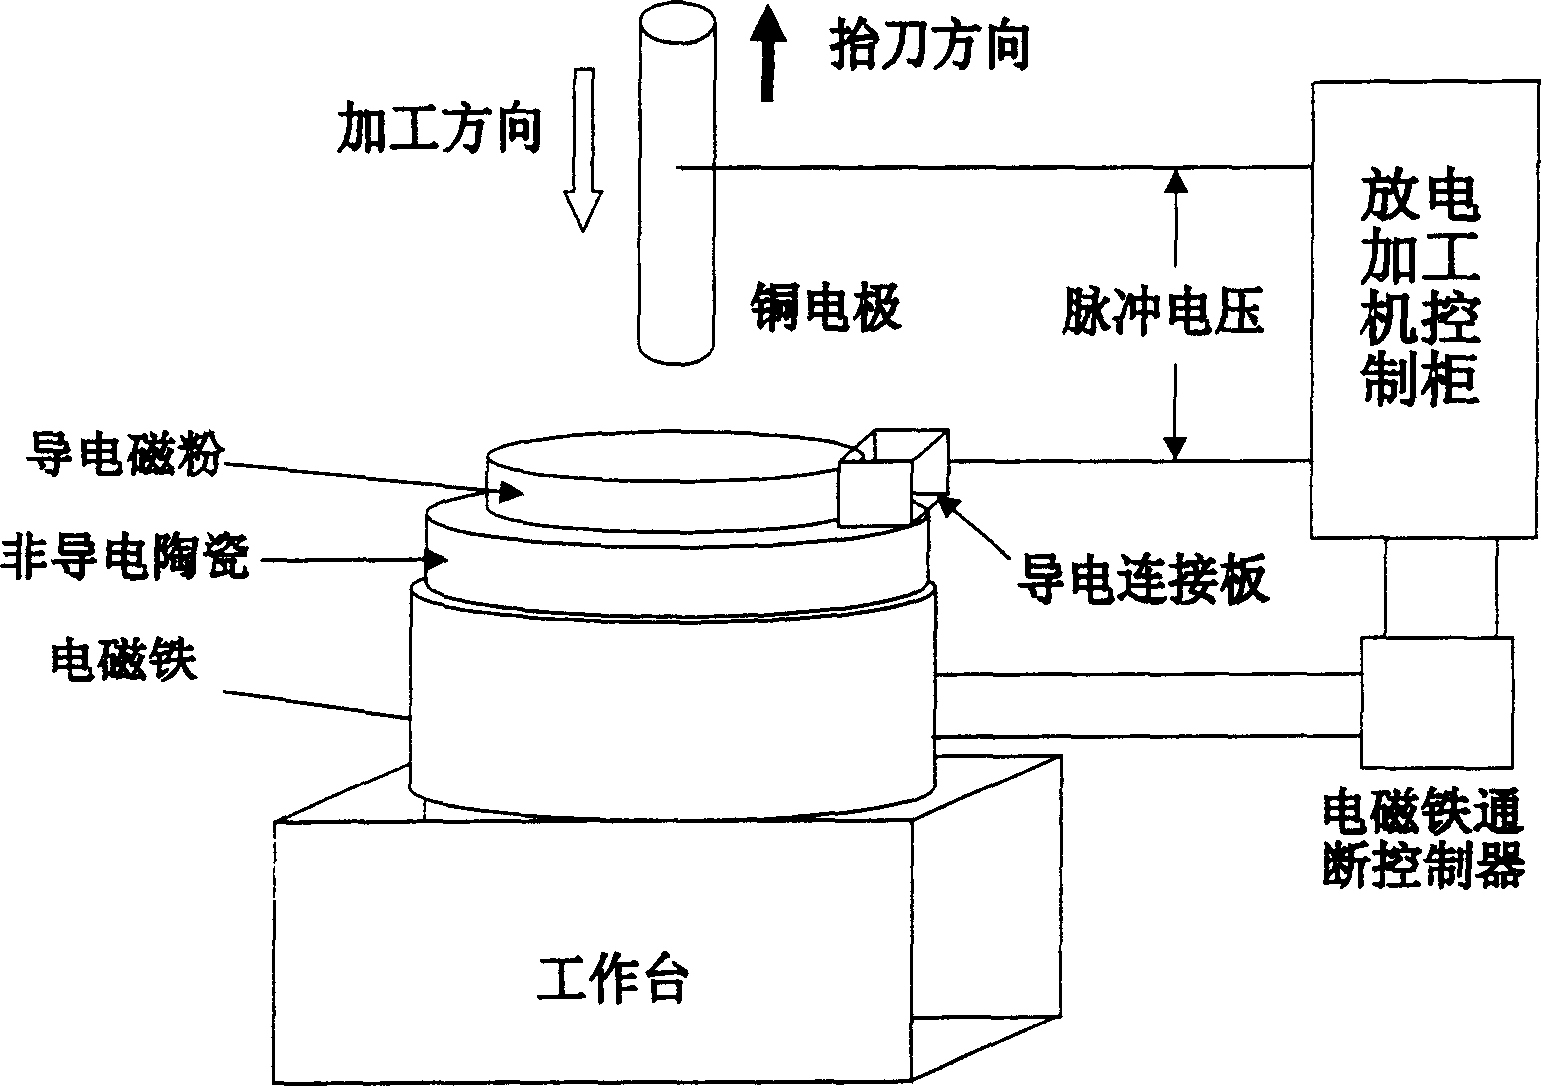 Electrodischarge machining method for working non-conductive ceramic utilizing conductive magnetic powder